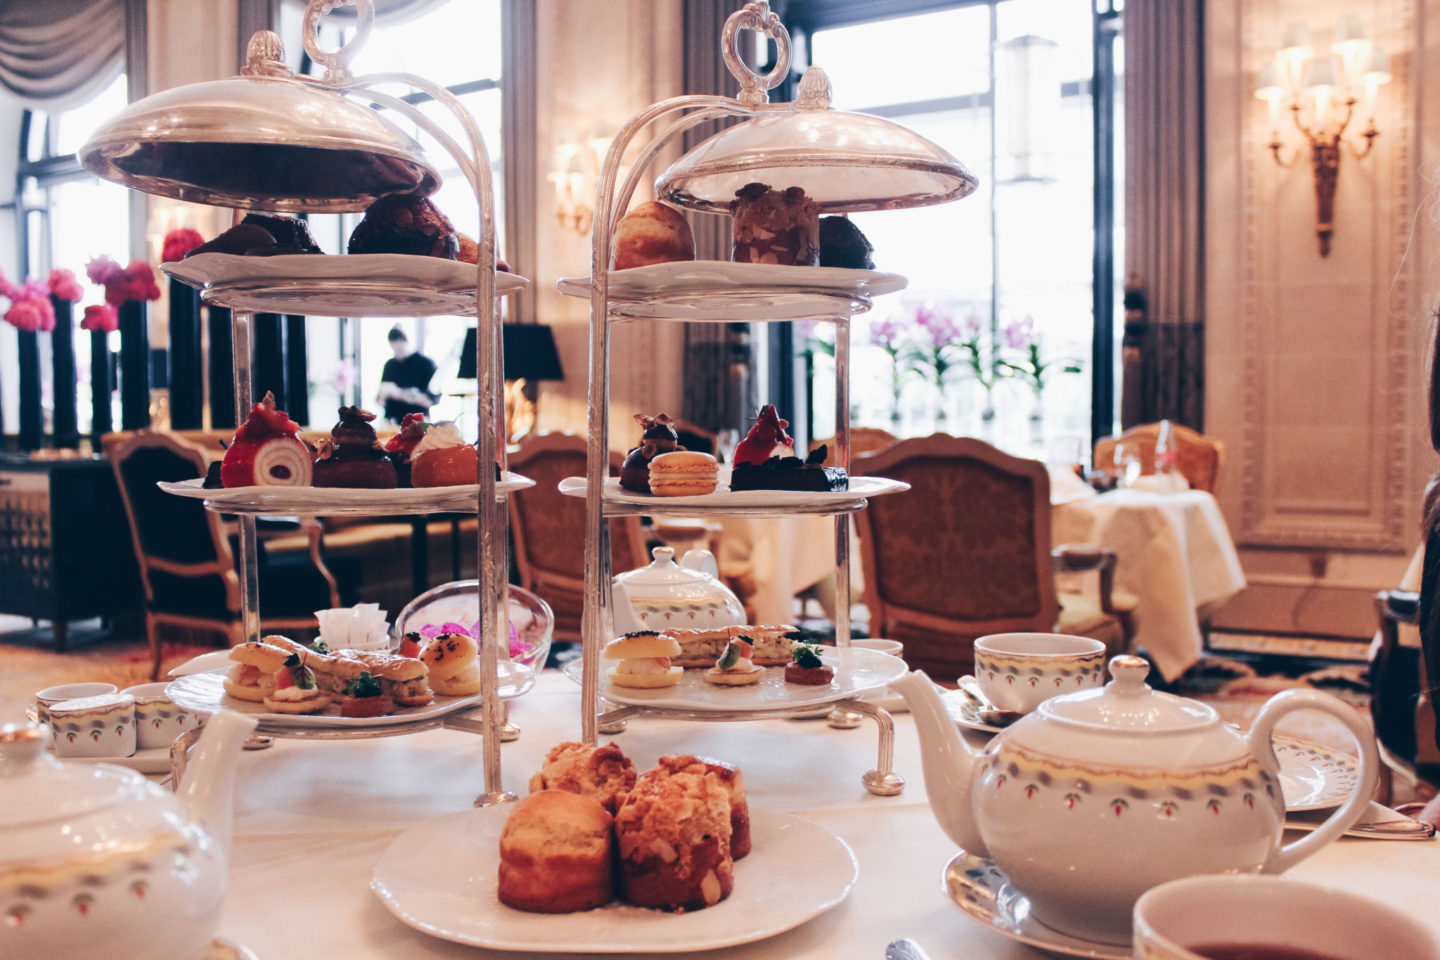 Tea in Paris: Our Afternoon Tea at Mariage Frères